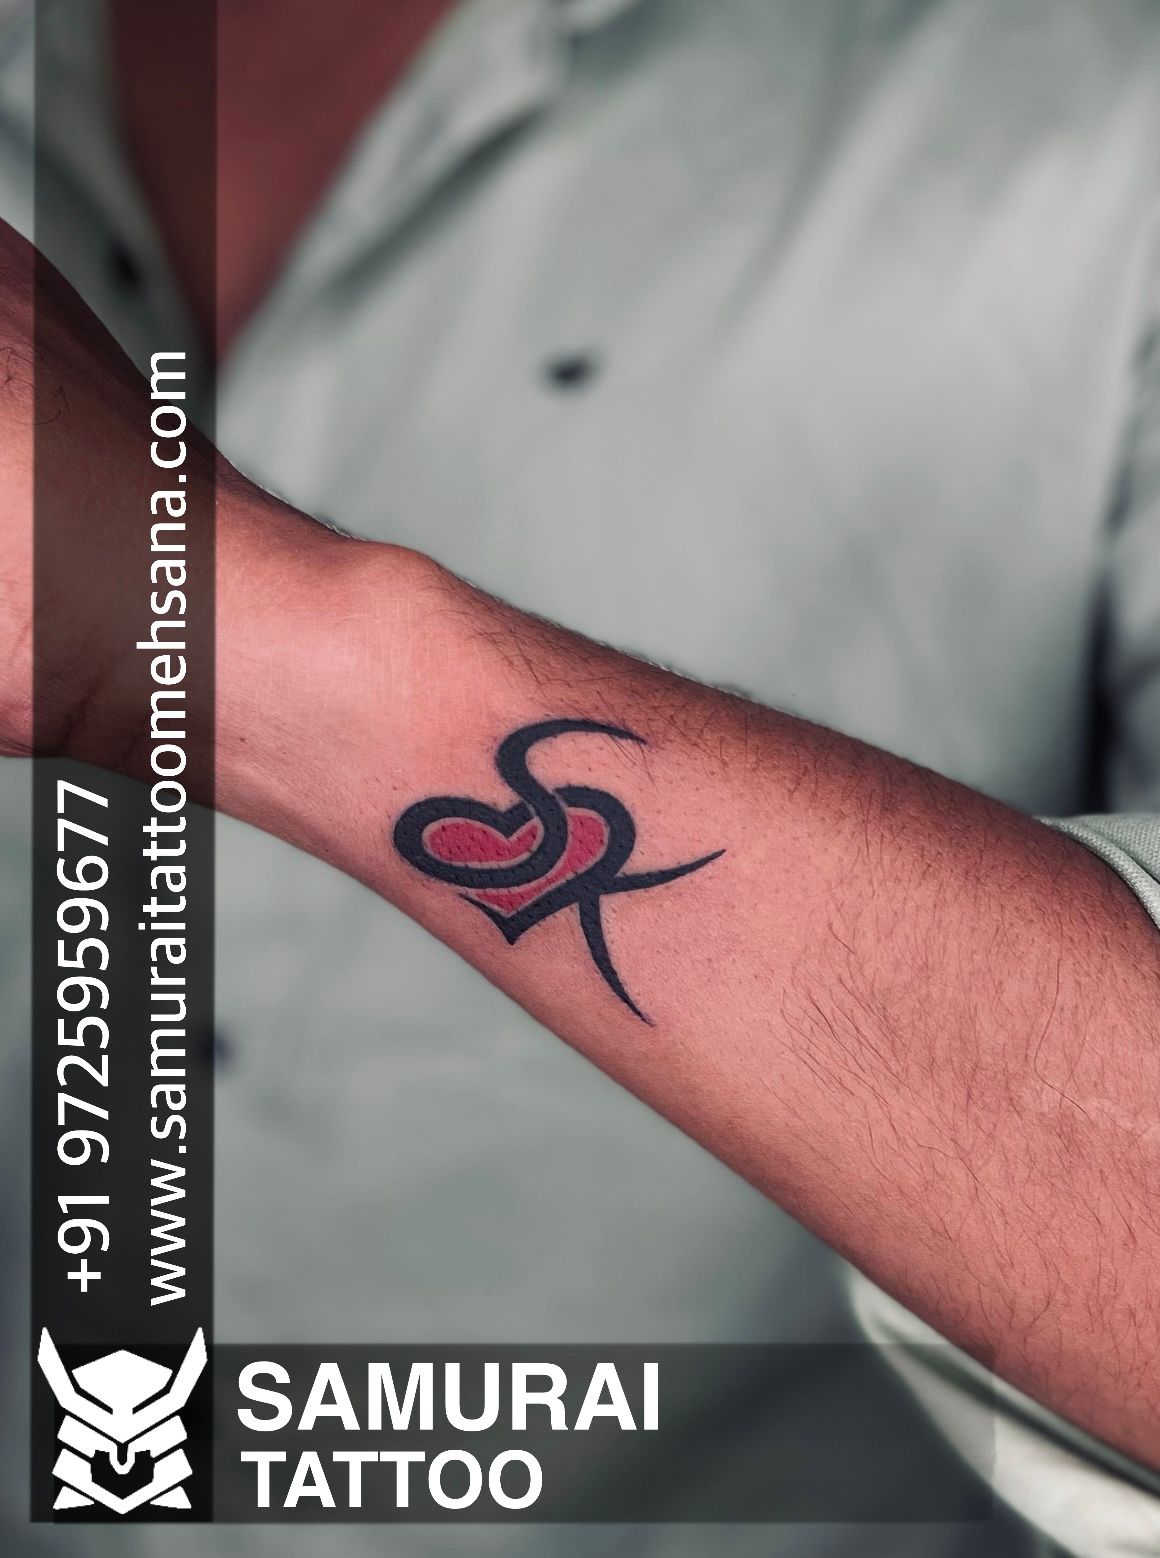 Tattoo uploaded by Vipul Chaudhary • Peace tattoo design |Peace logo tattoo  |Peace tattoo • Tattoodo